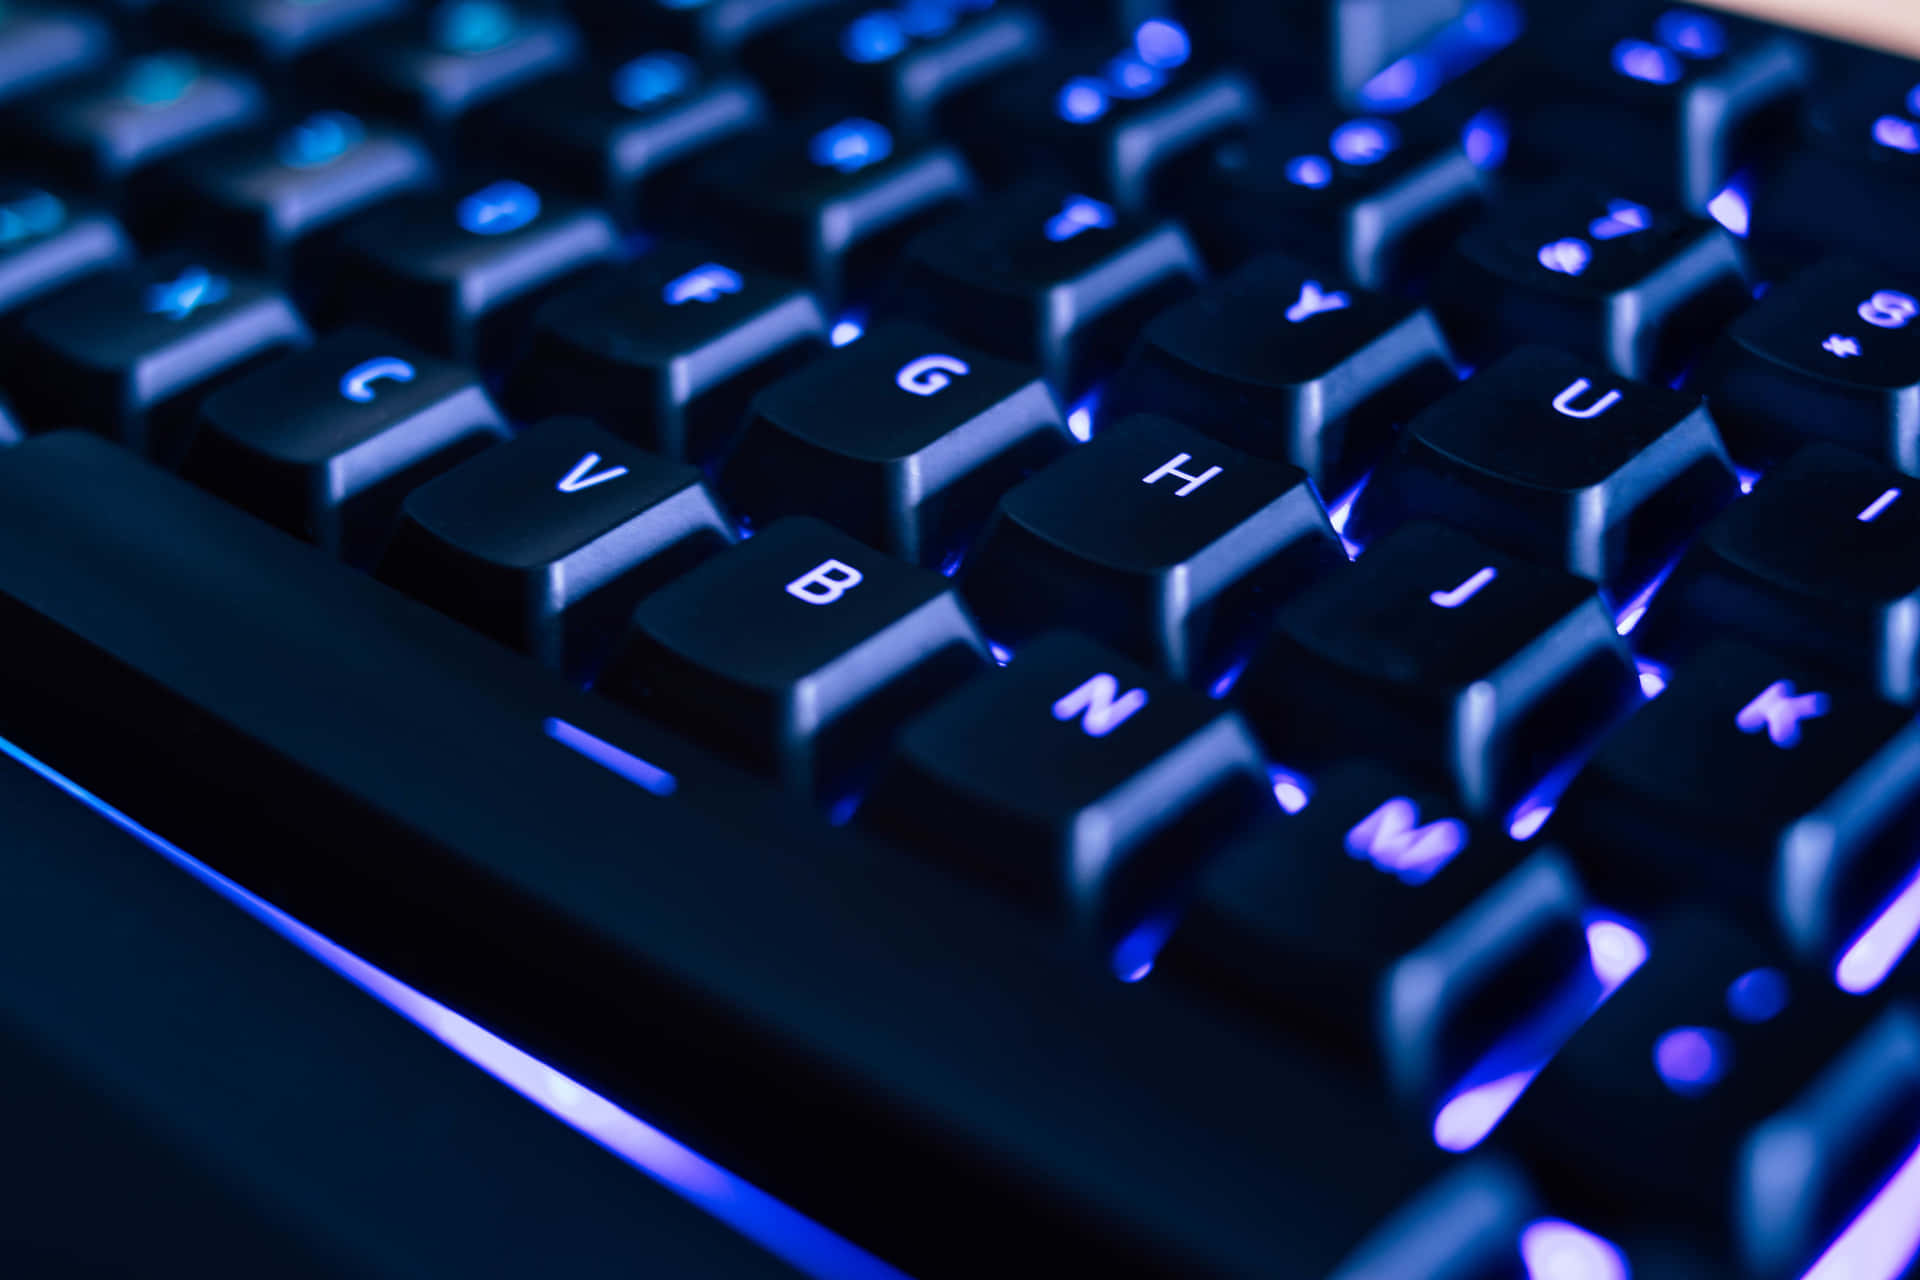 Improve your gaming experience with Gaming Keyboards Wallpaper